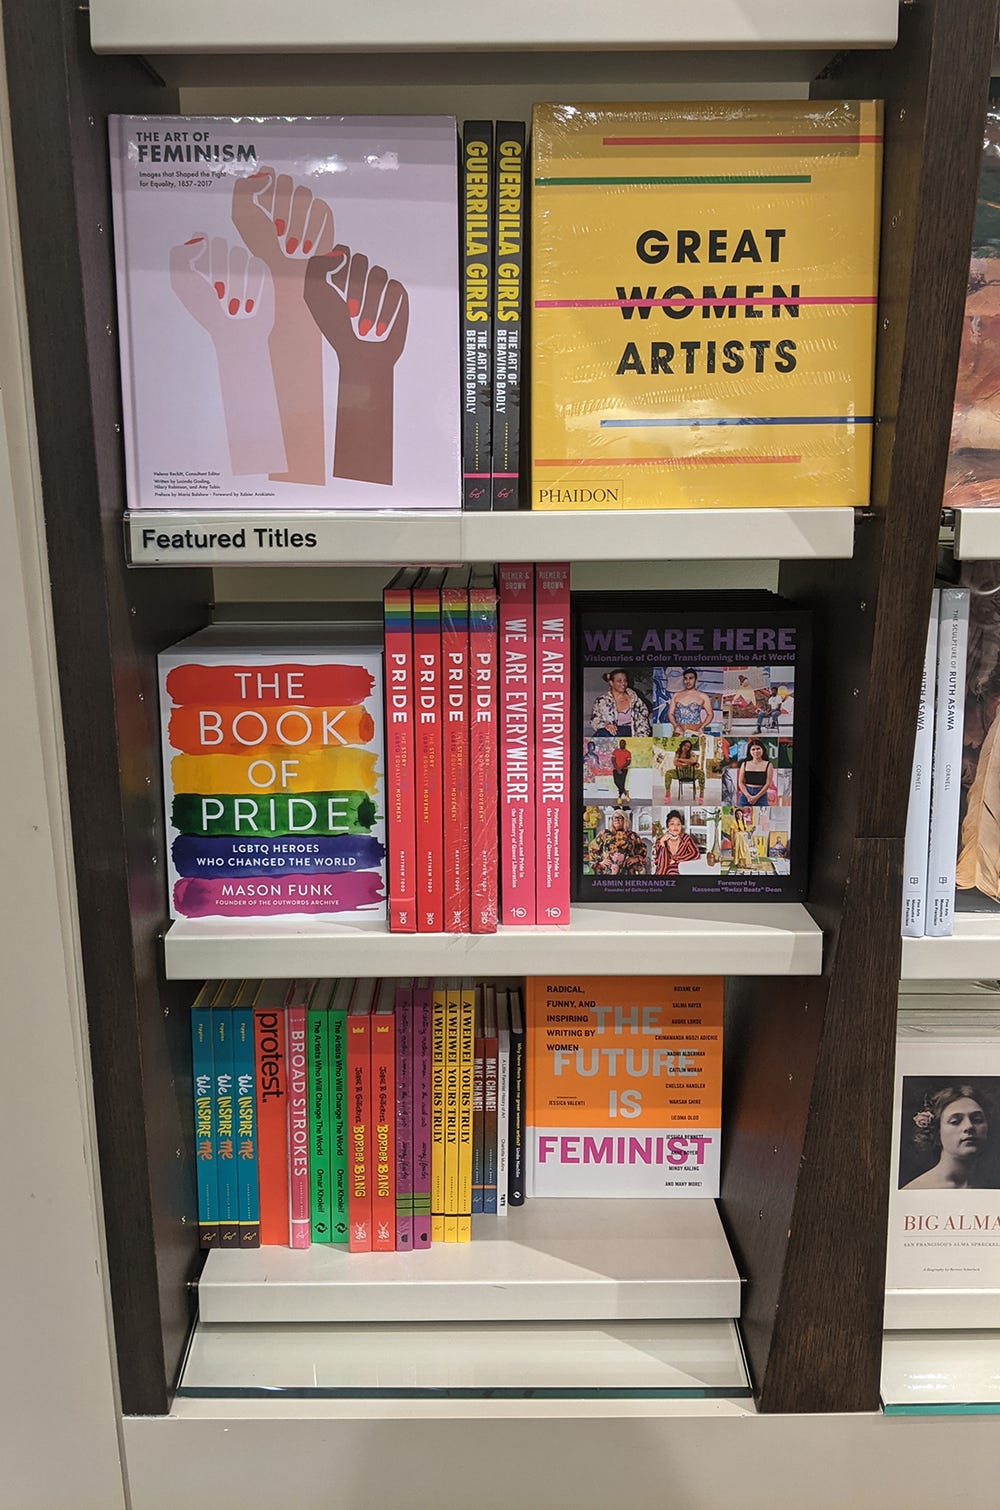 three rows of books in a bookshelf featuring women artists and contemporary-museum culture